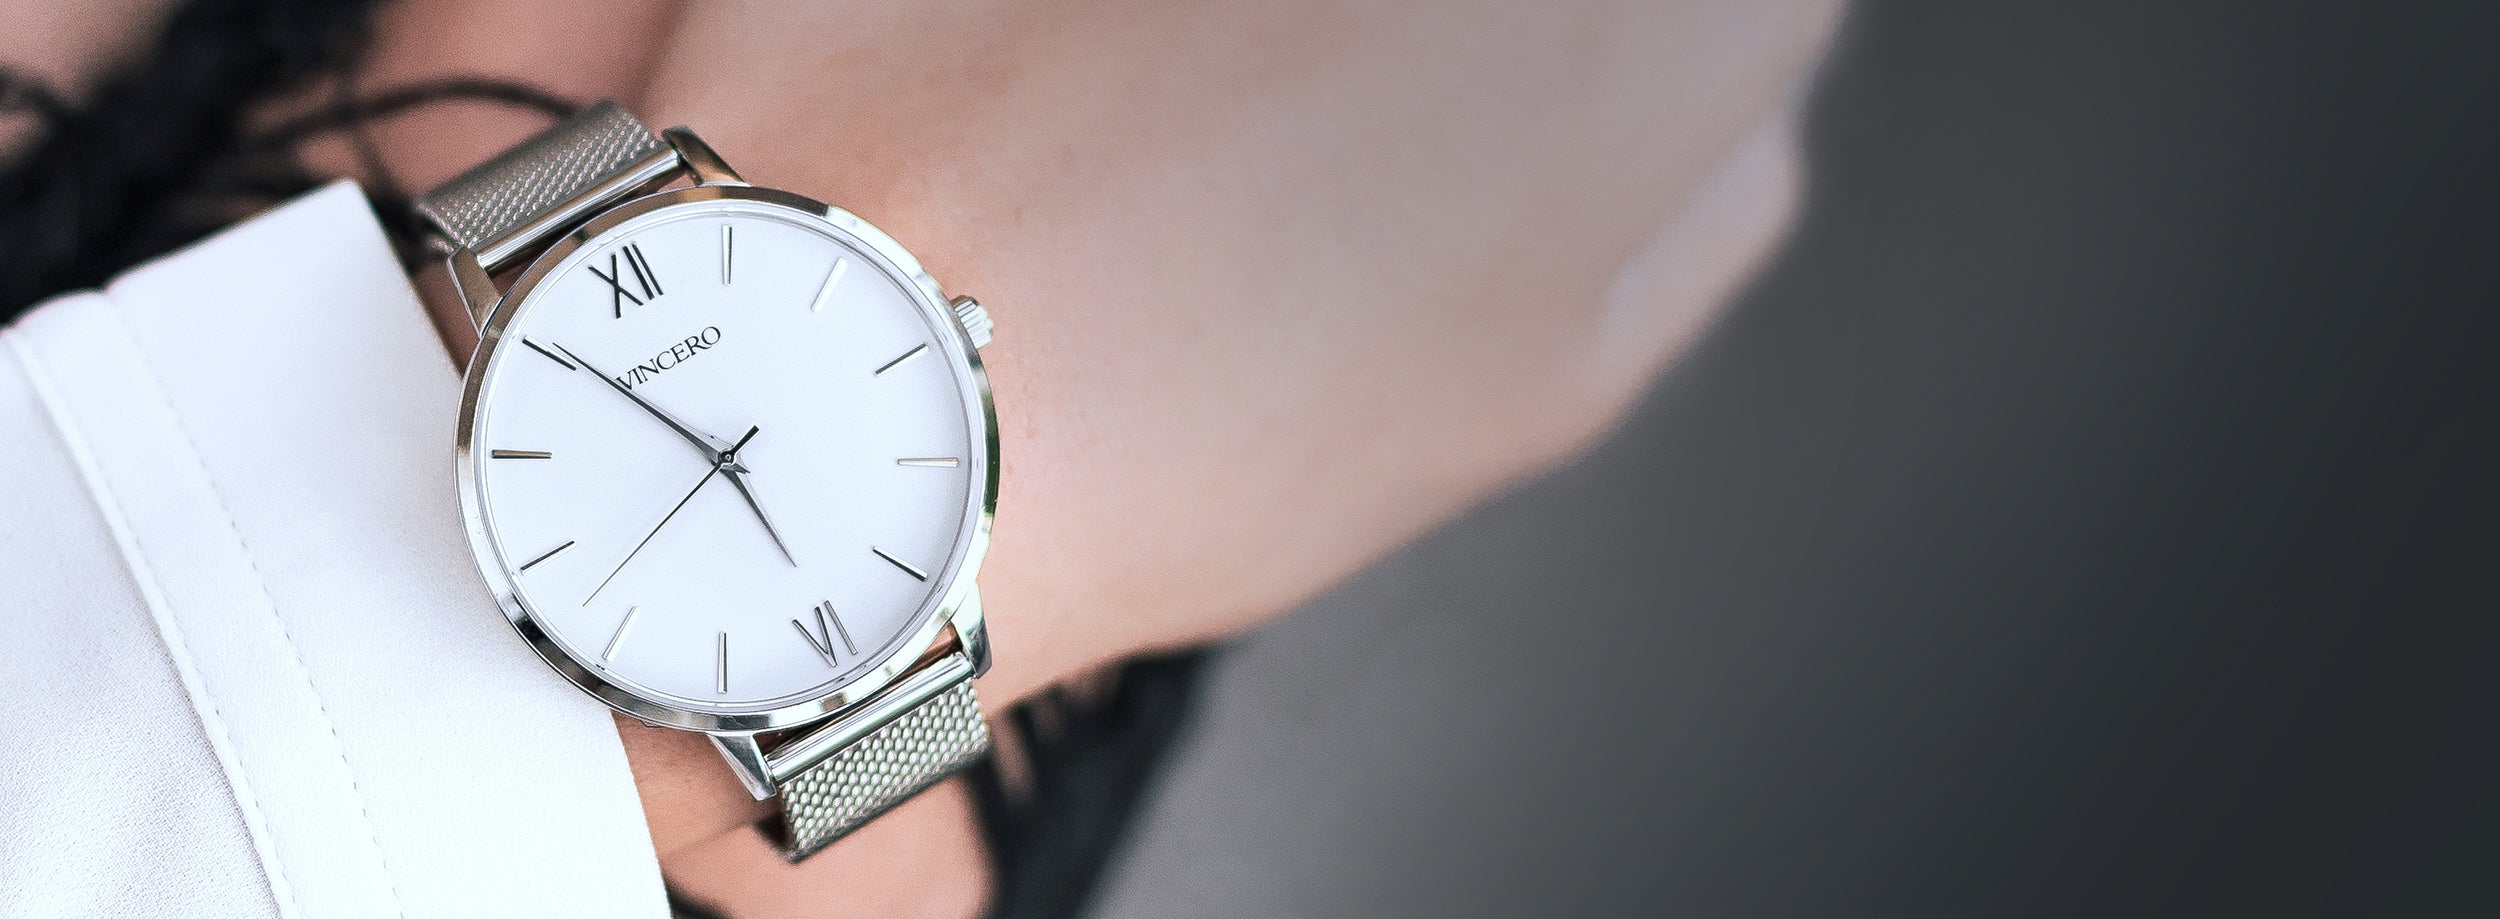 Close up of white and silver watch with silver mesh strap